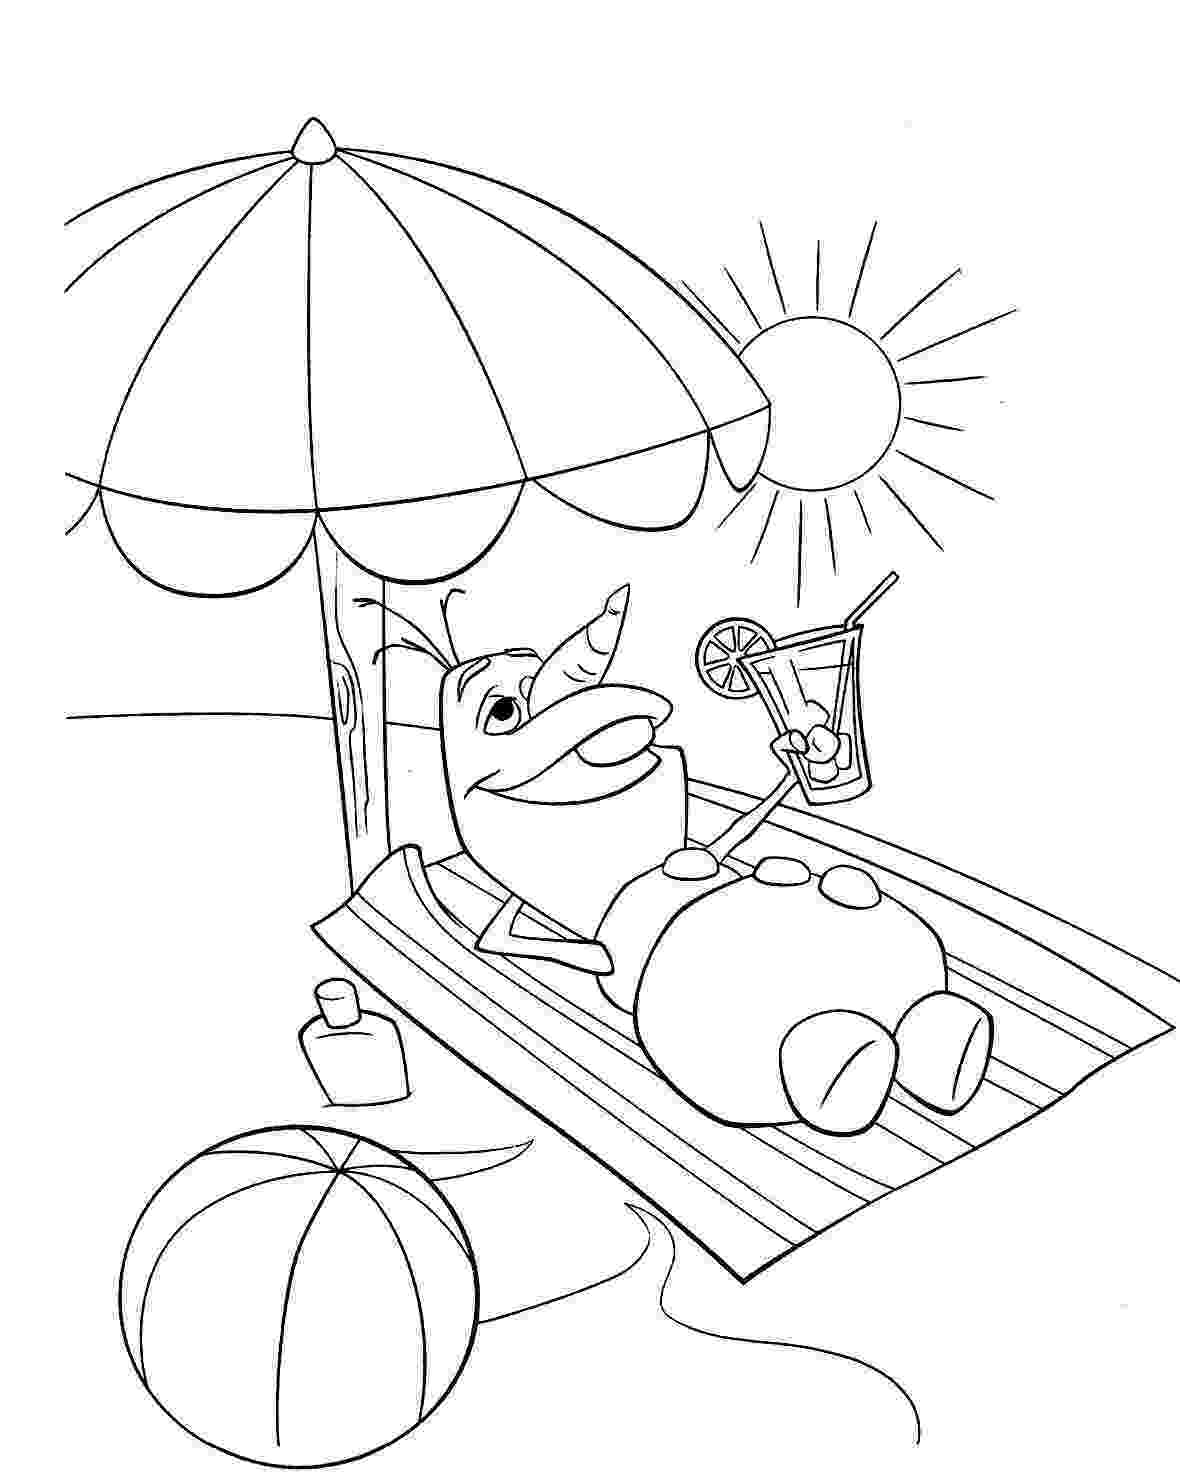 summer coloring page summer coloring pages coloring page summer 1 1